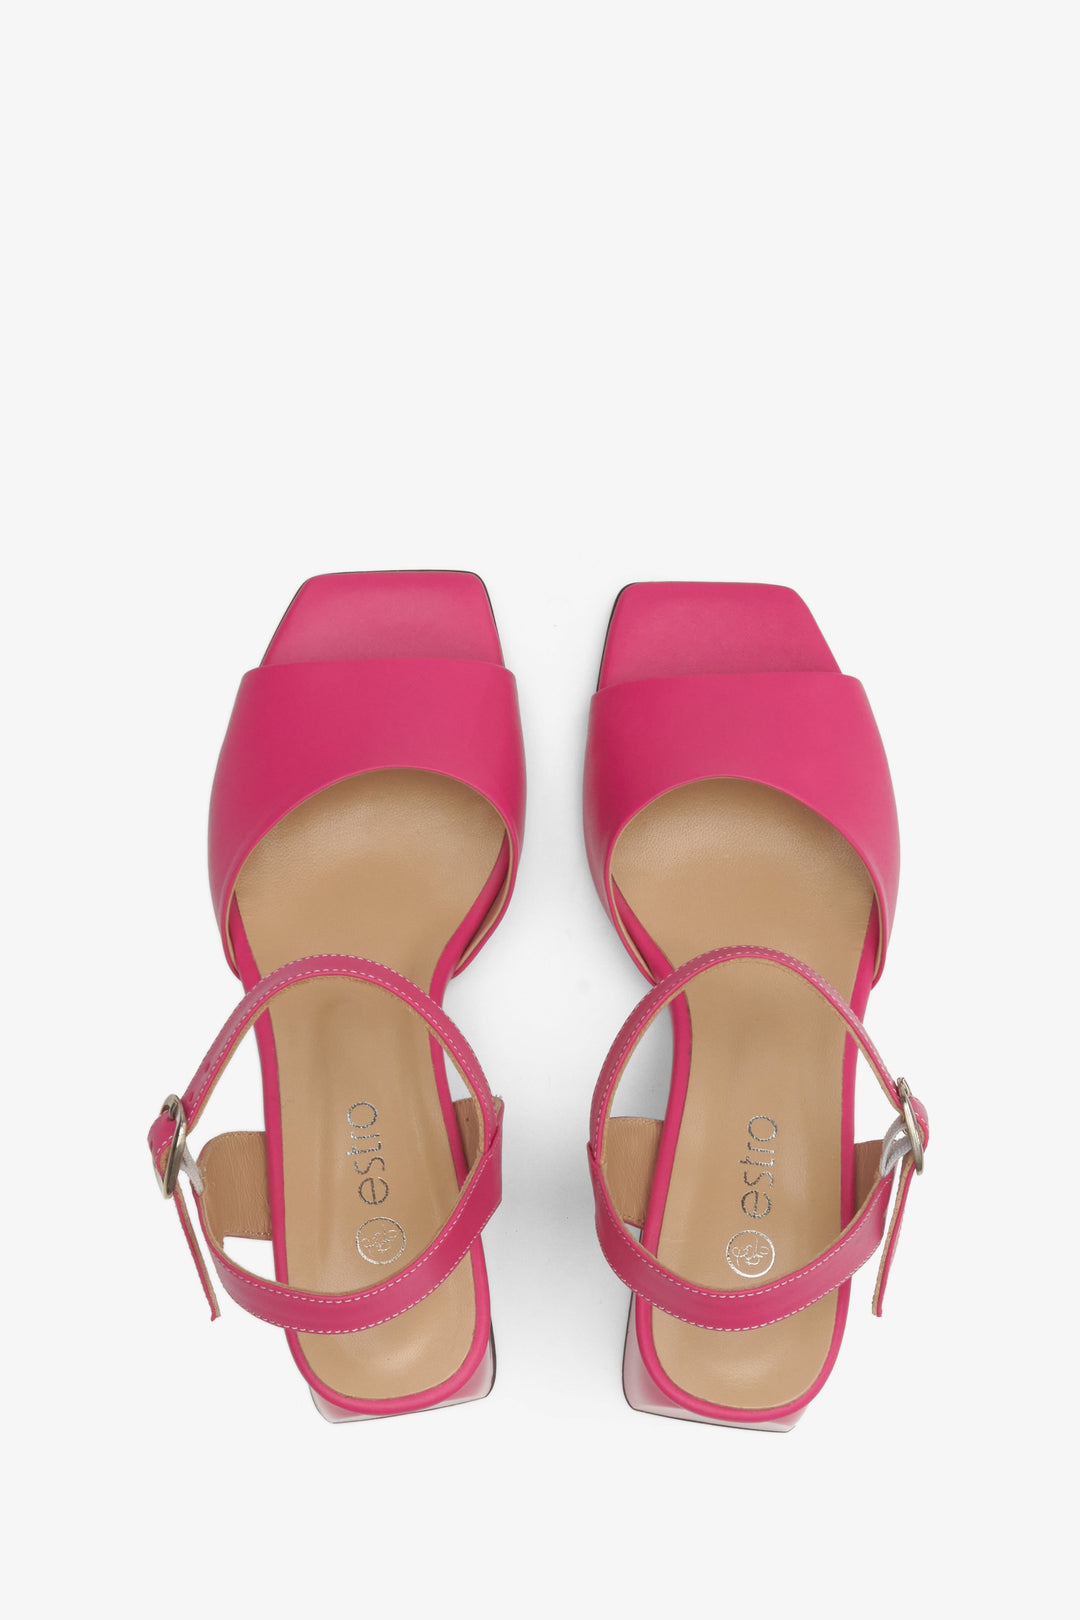 Women's pink leather sandals by Estro - top-down view of the footwear presentation.